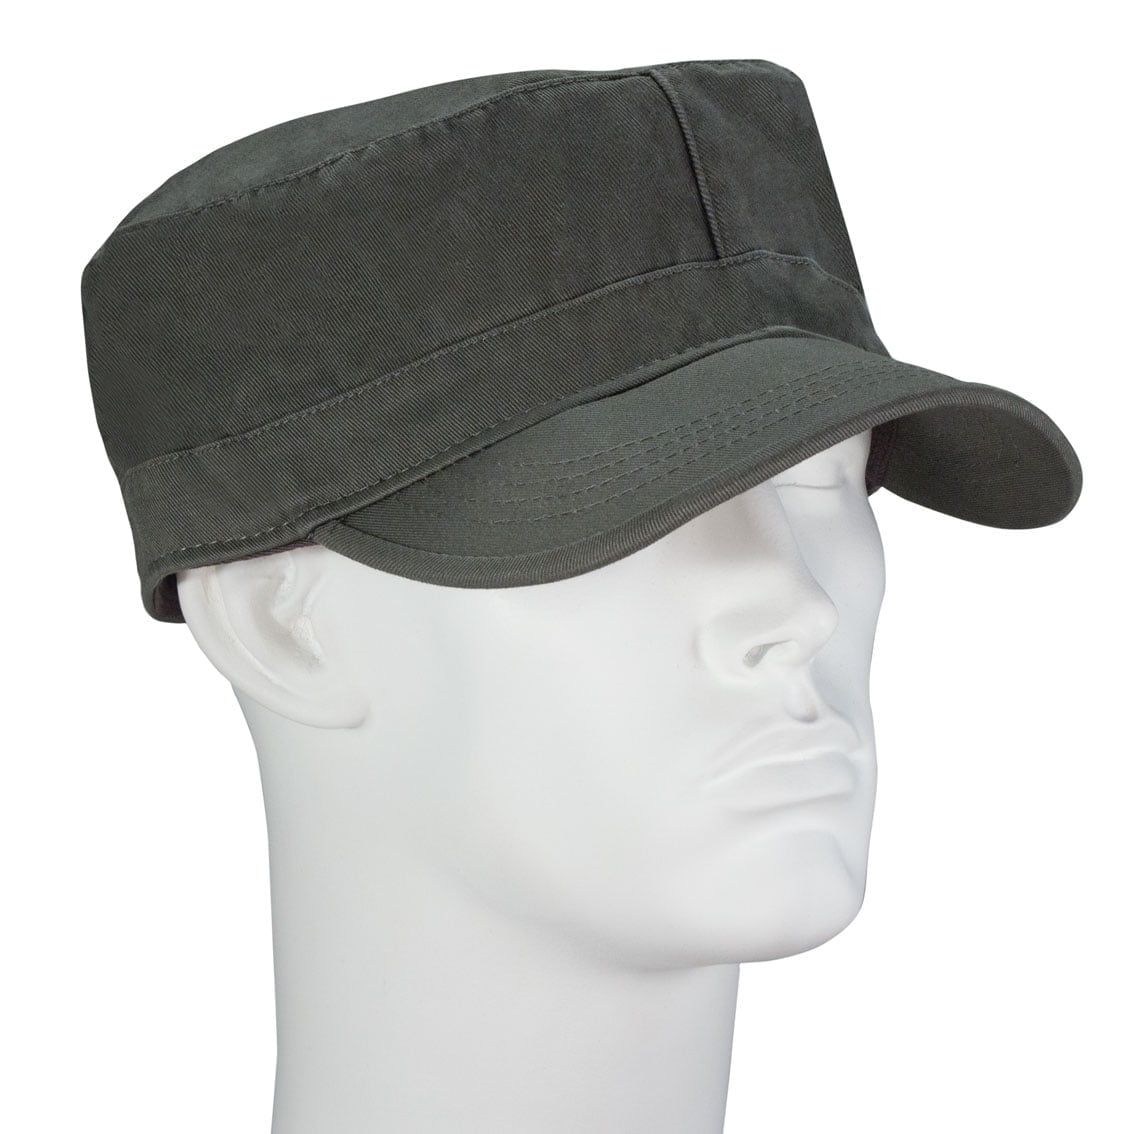 12pcs Olive Plain Castro Military Fatigue Army Hats - Fitted - Unconstructed - 100% Cotton - Bulk by the Dozen - Wholesale